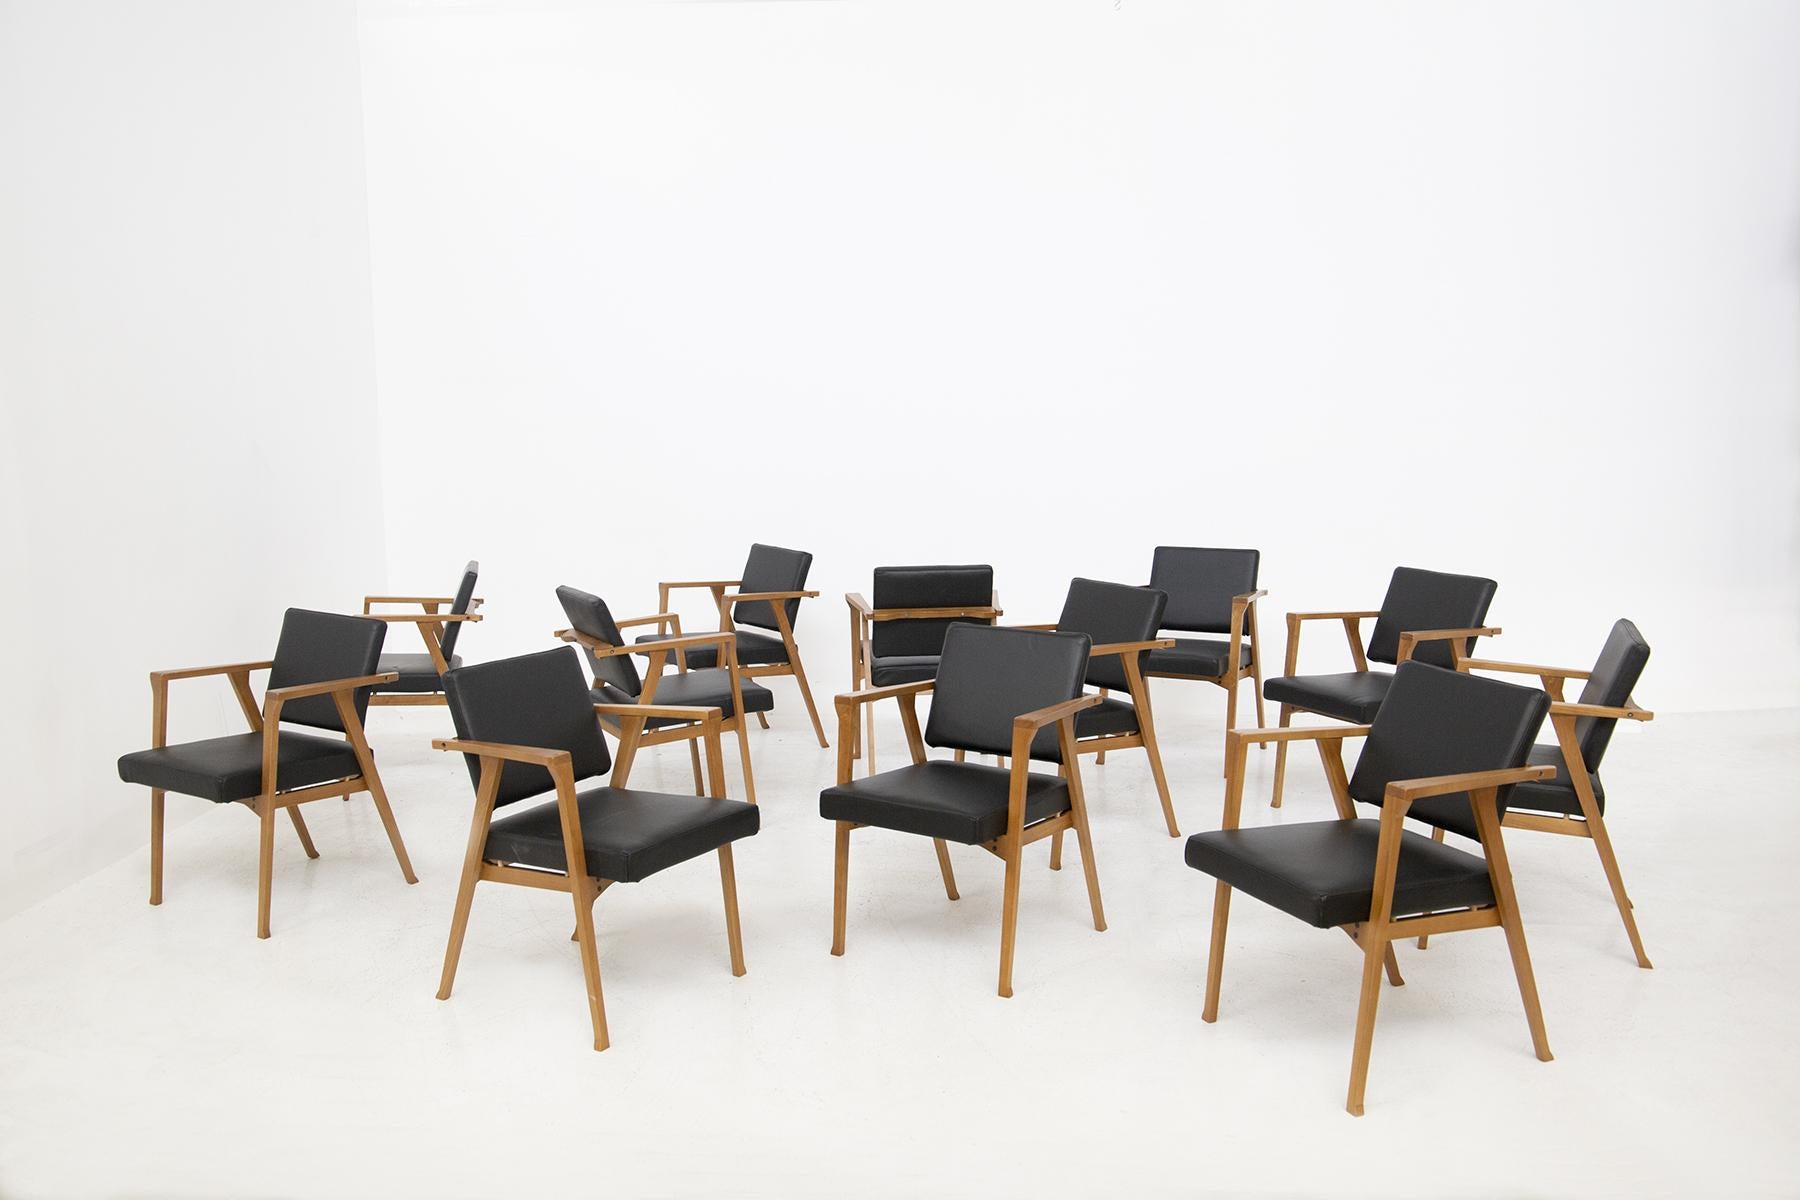 Wonderful set composed of twelve chairs attributed to Franco Albini from 1950.
The structure of the chairs was made of wood, with a purely geometric and square shape, the seat and backrest were reupholstered in fine black leather. The back of the